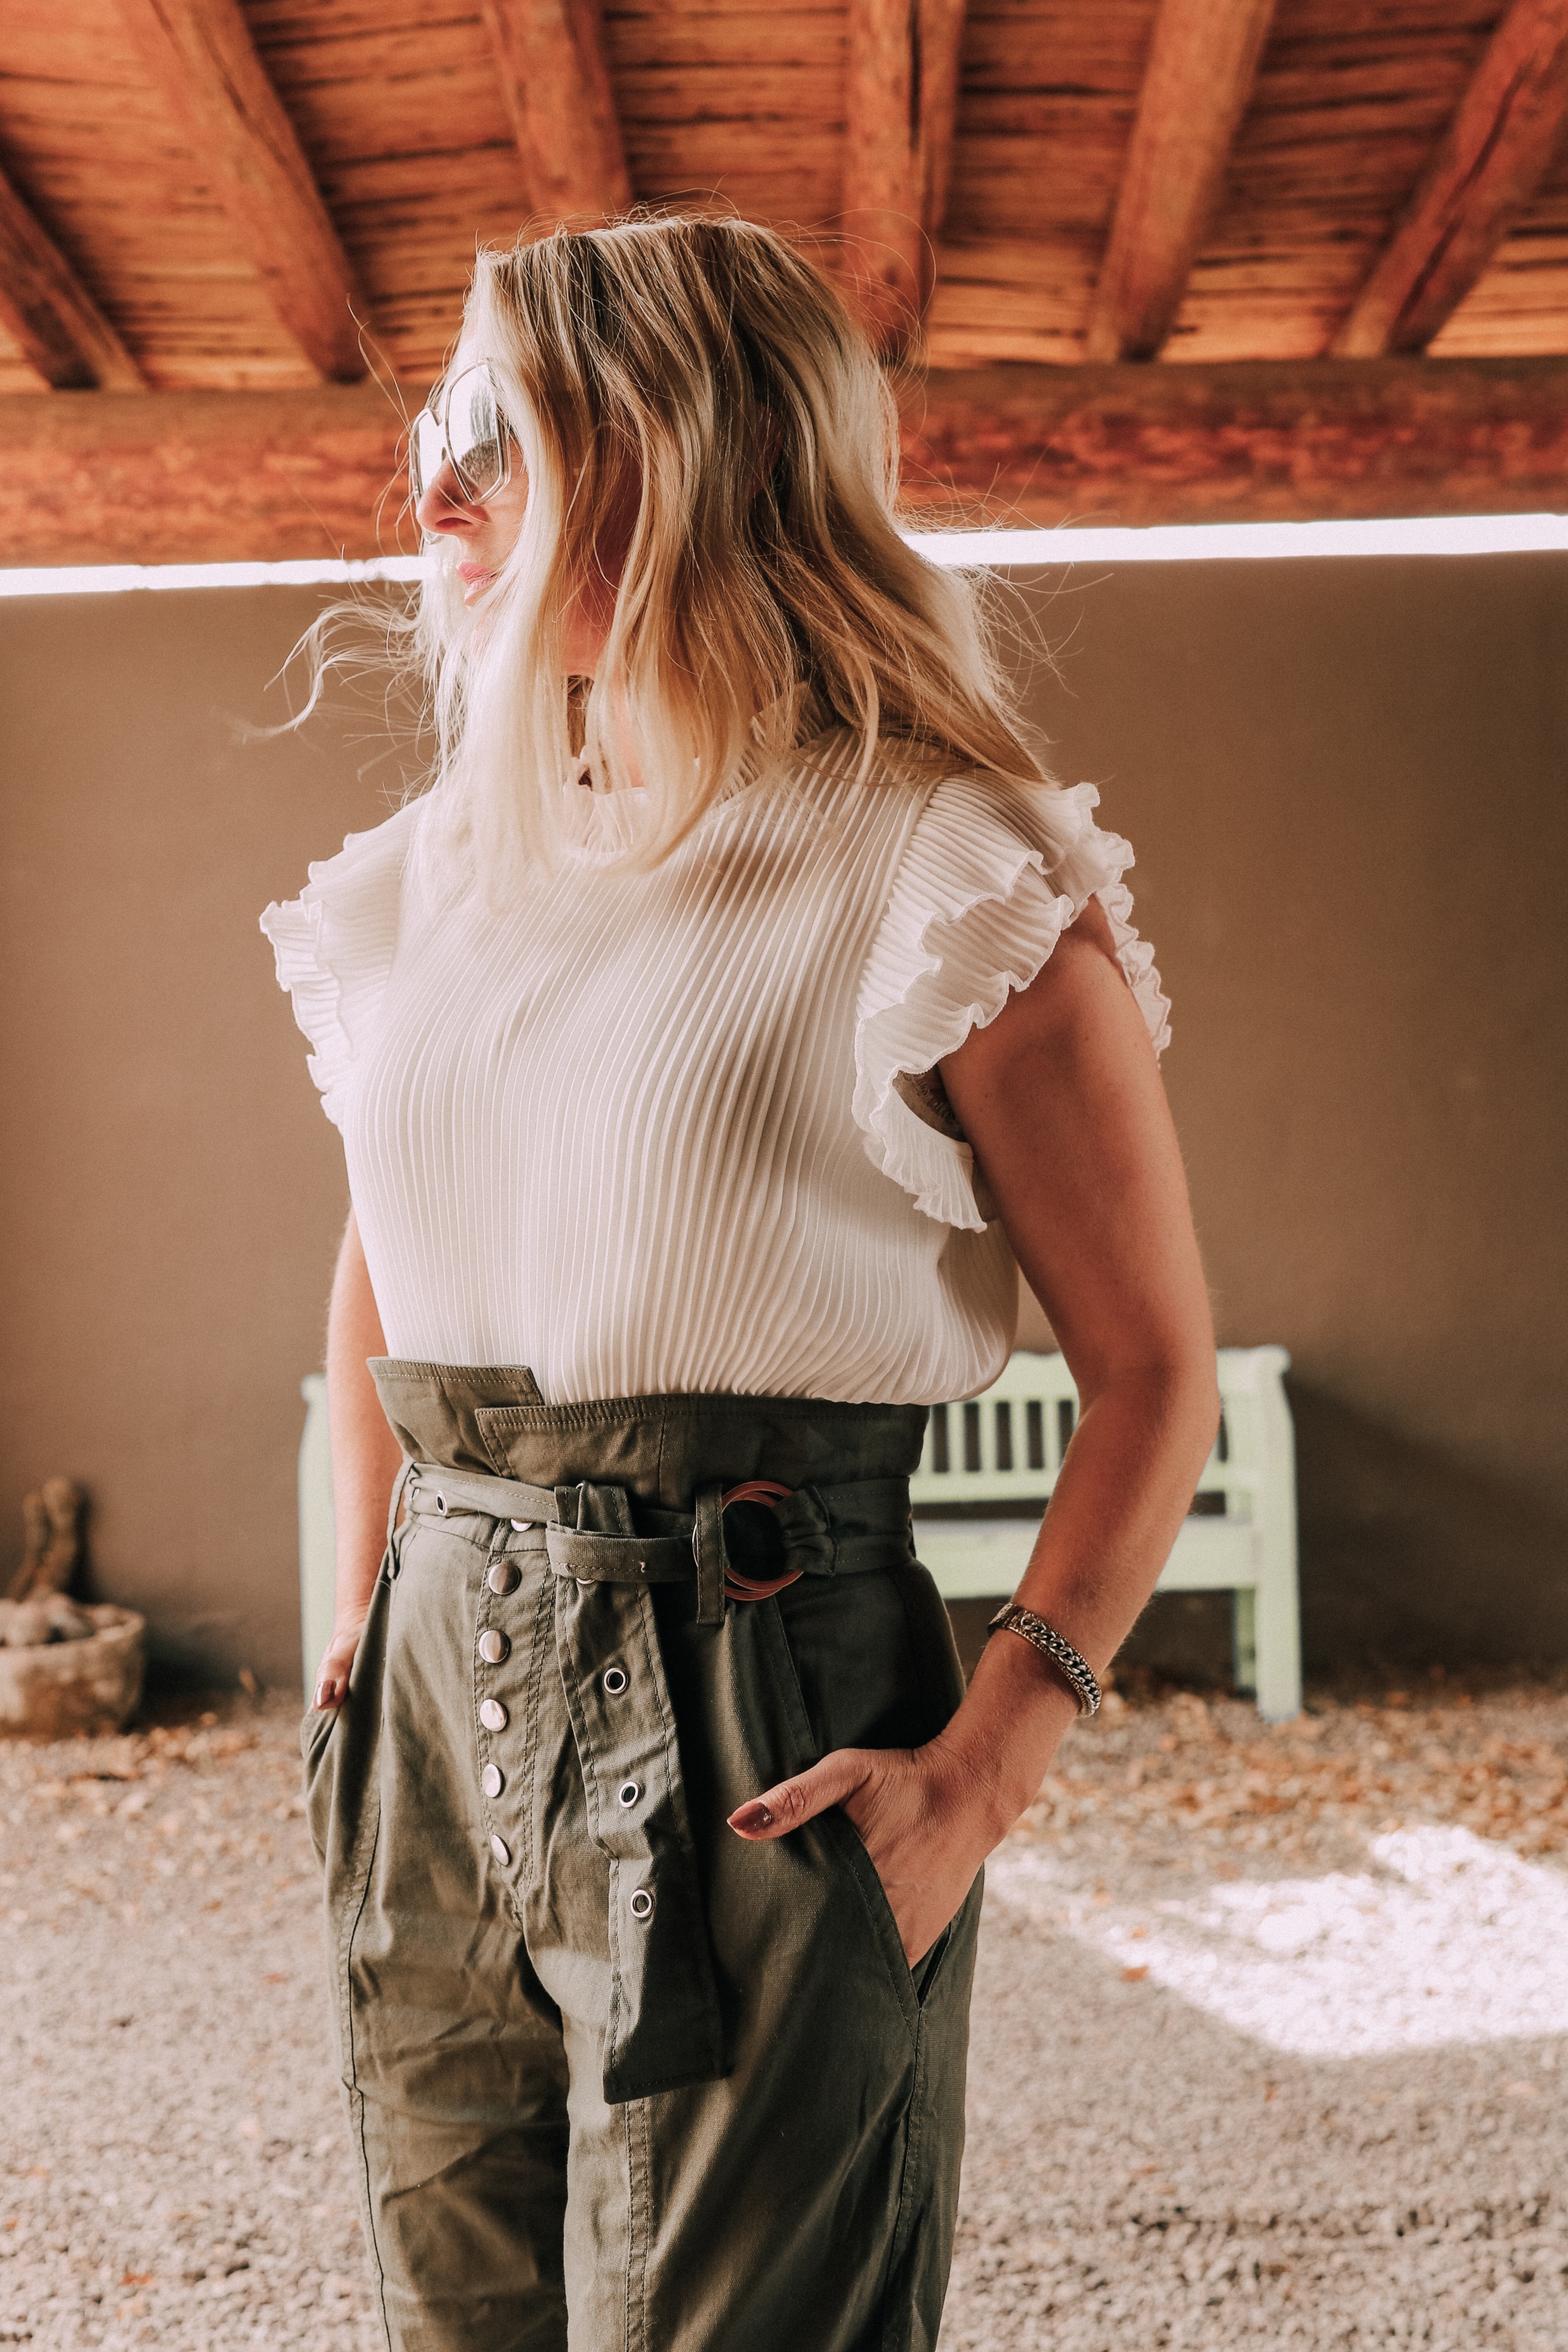 Edgy Classic Style, Fashion Blogger Erin Busbee of BusbeeStyle.com wearing green Gia Pants by Marissa Webb with a white ruffle blouse by Gibson from Nordstrom with camo Linea Paolo wedge sneakers at Cibolo Creek Ranch in Texas